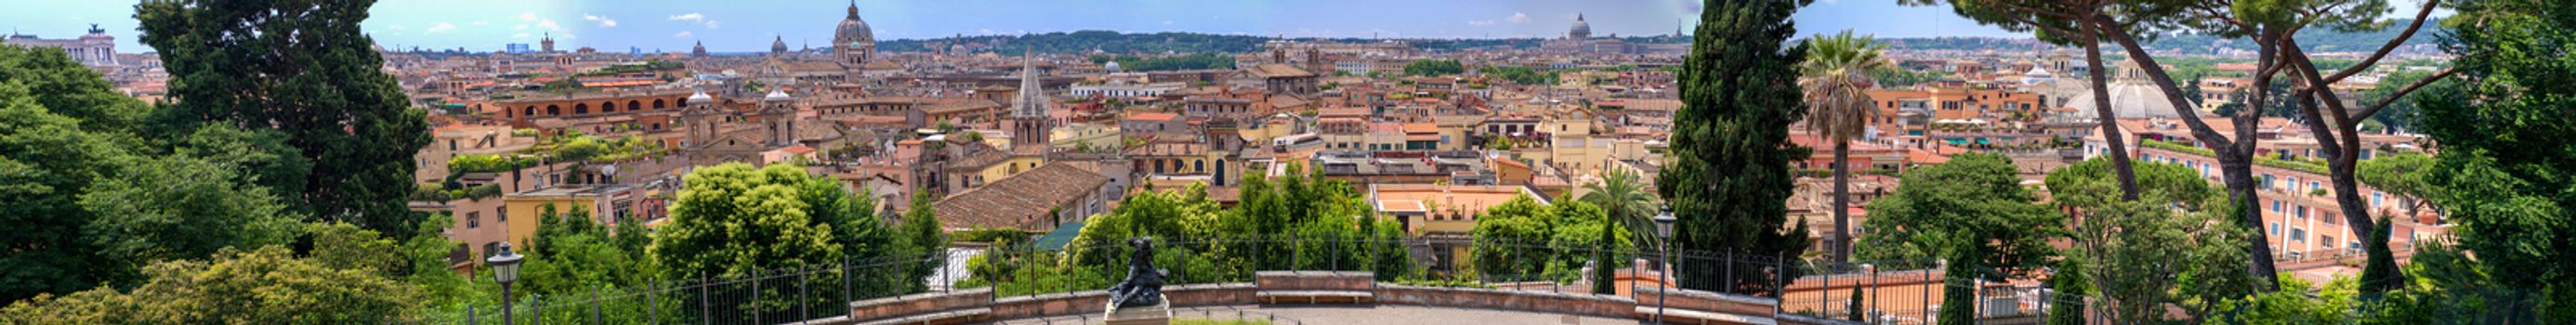 Rome, Italy. Panoramic giant view of city skyline from Pincio hill.